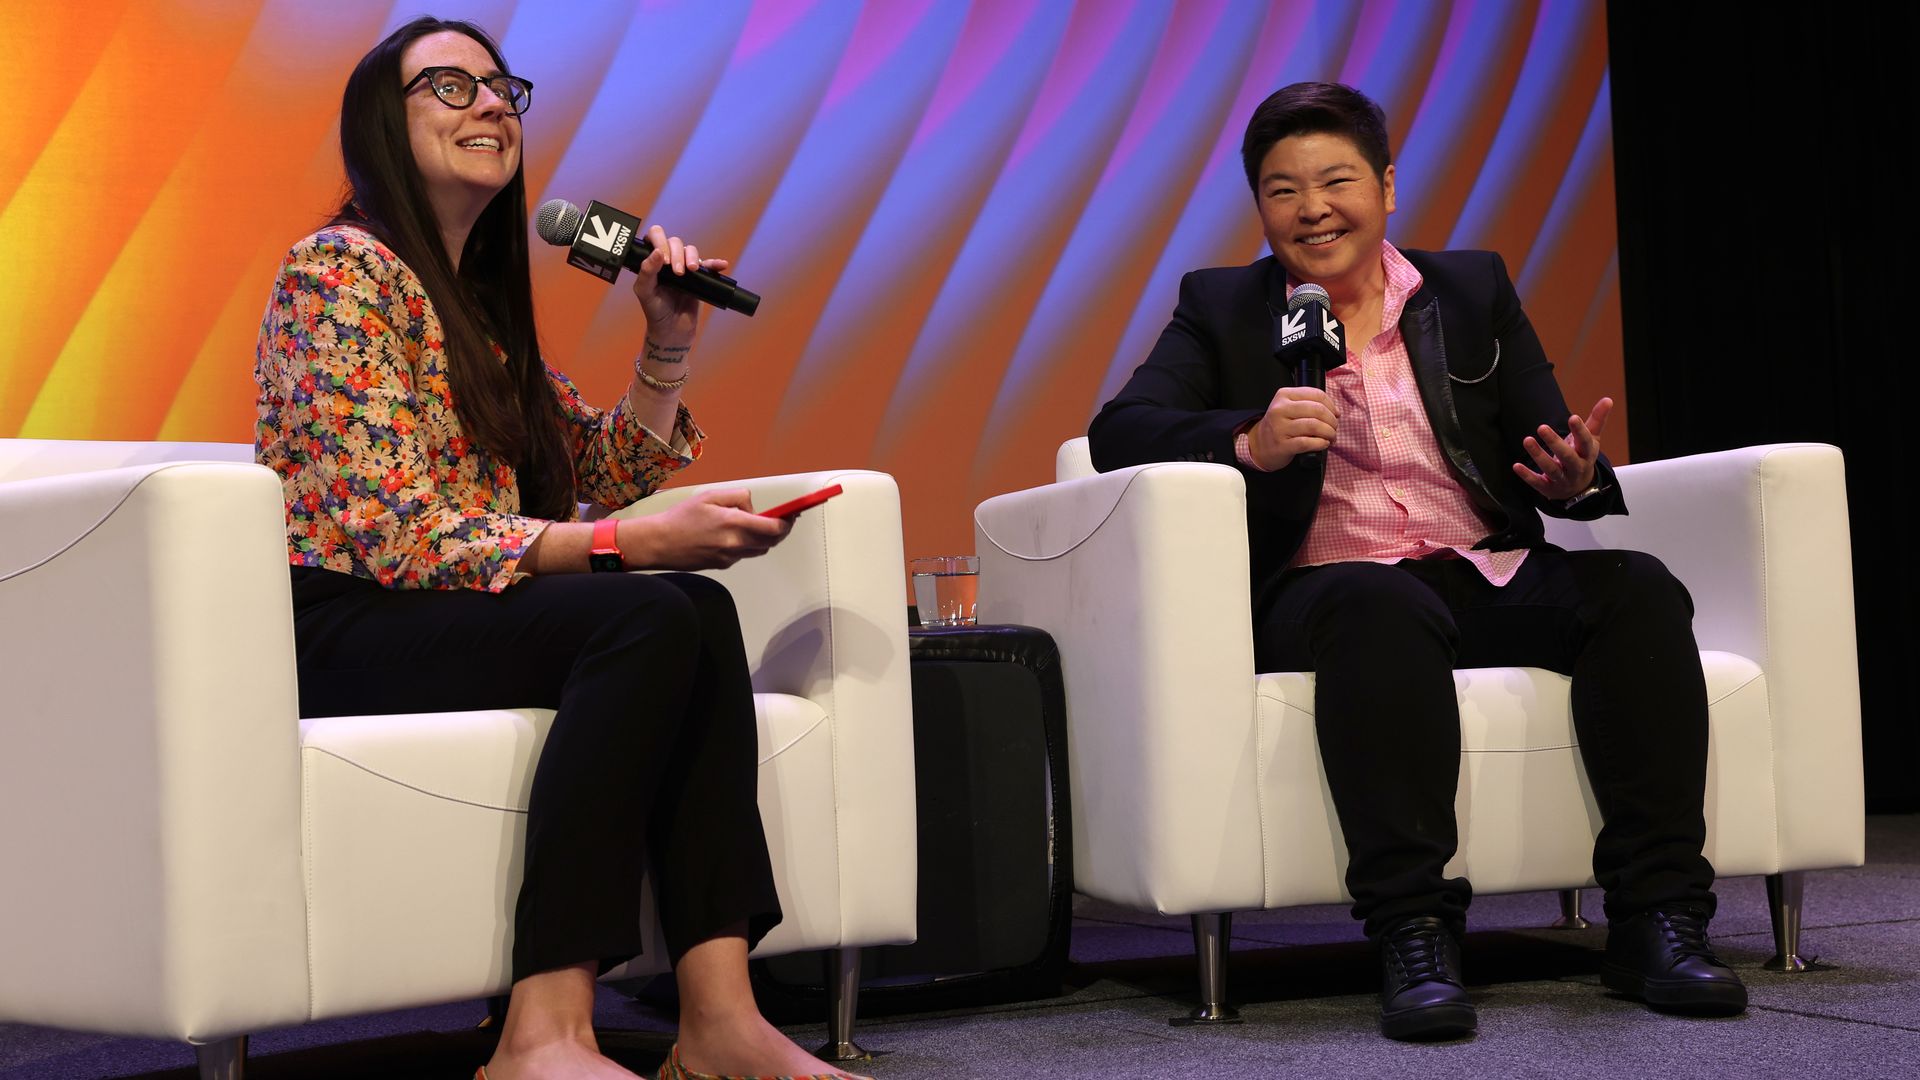 Axios' Kerry Flynn and Reddit's Jen Wong sitting in white chair side by side